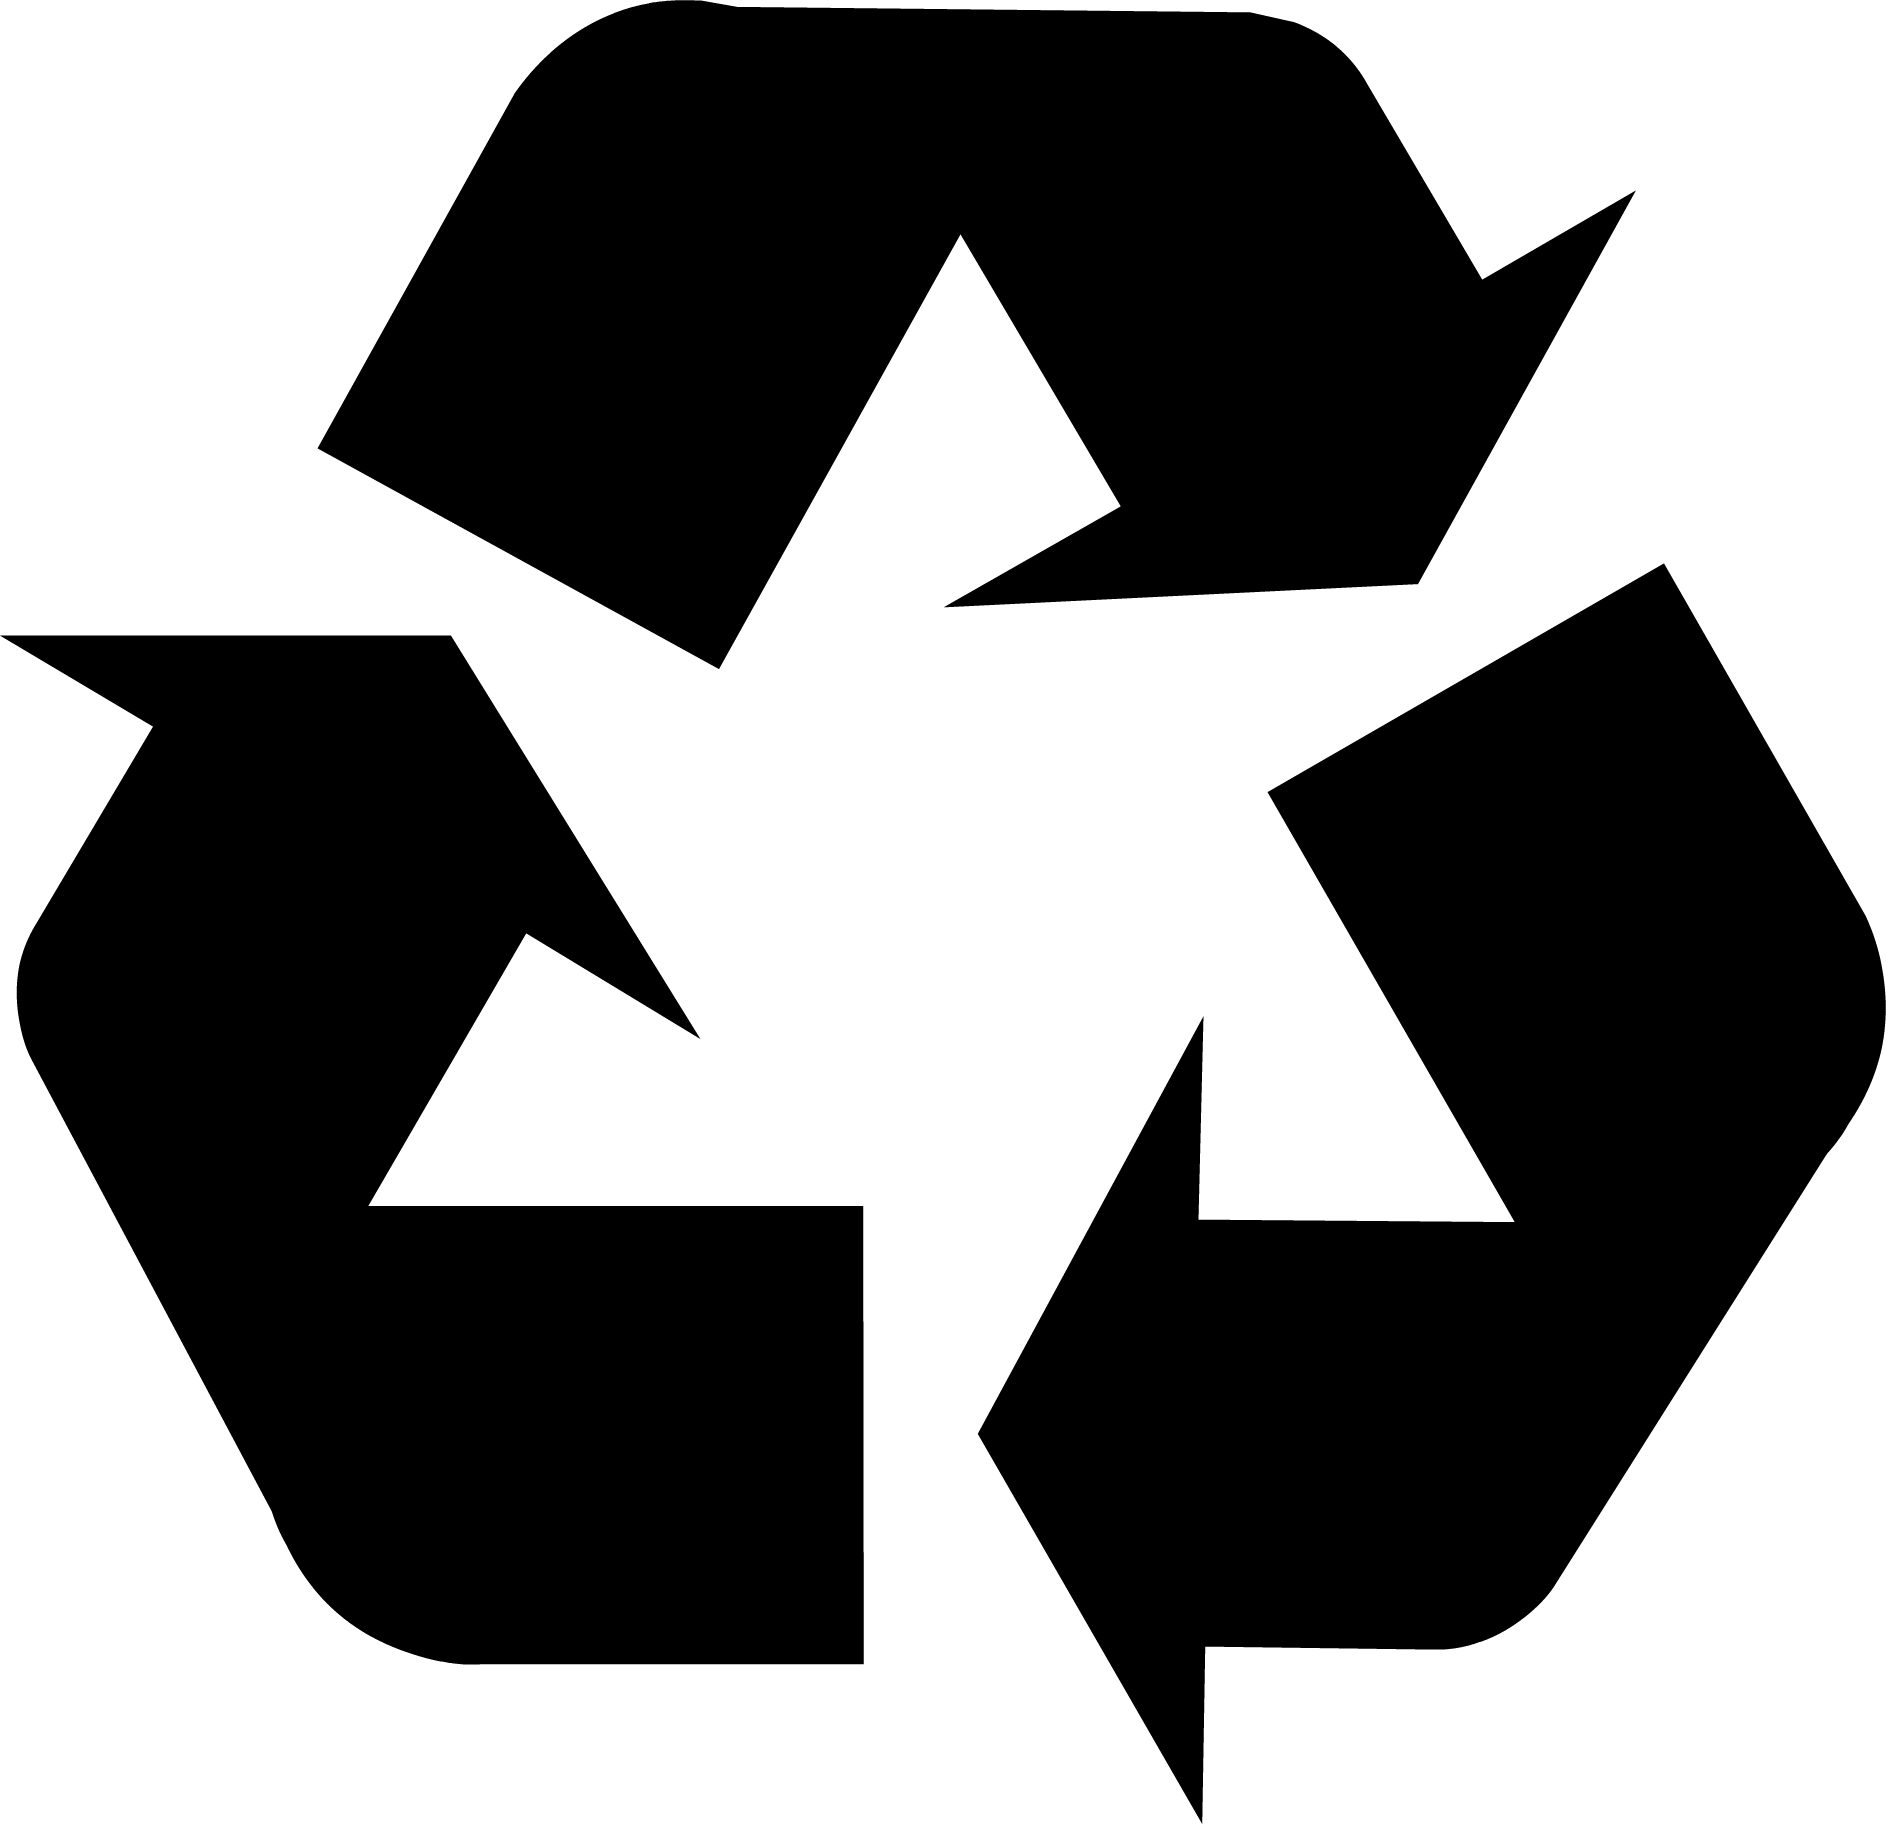 We Recycle Logo - Recycling Symbol the Original Recycle Logo